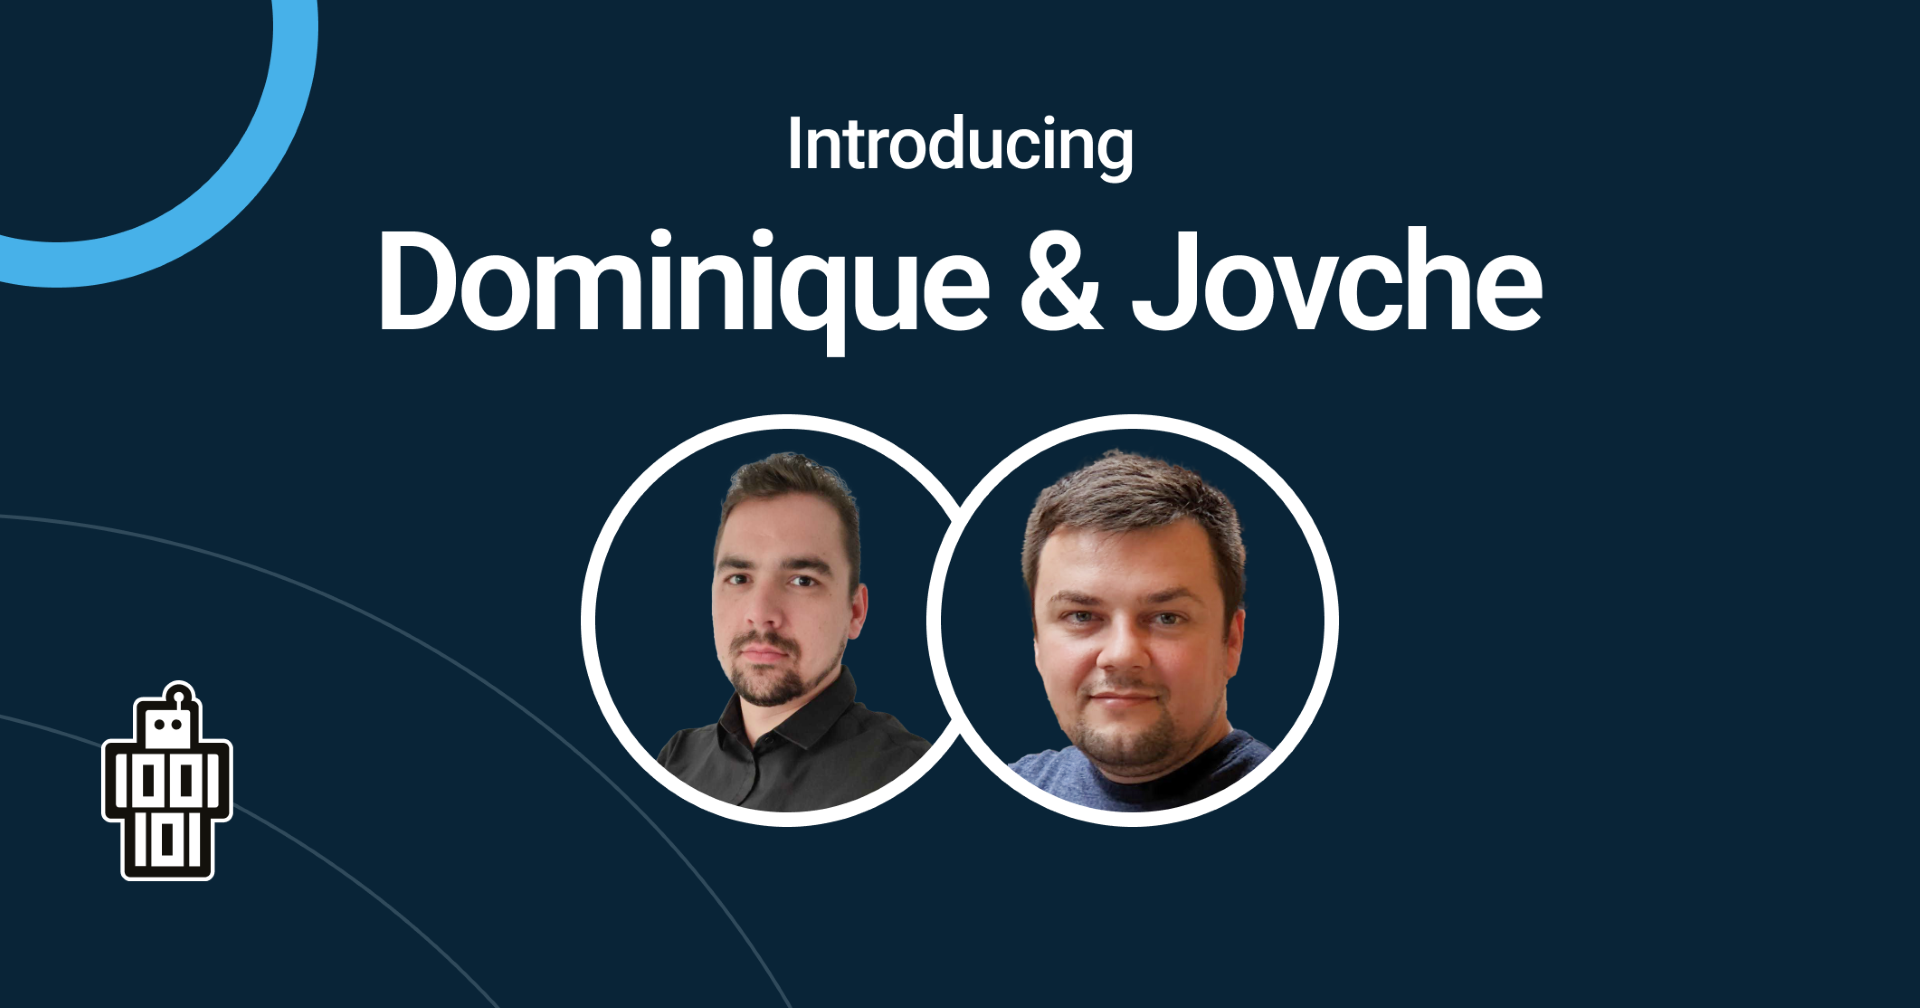 Meet Dominique and Jovche - We would like to introduce you to our new Android Developers Dominique en Jovche